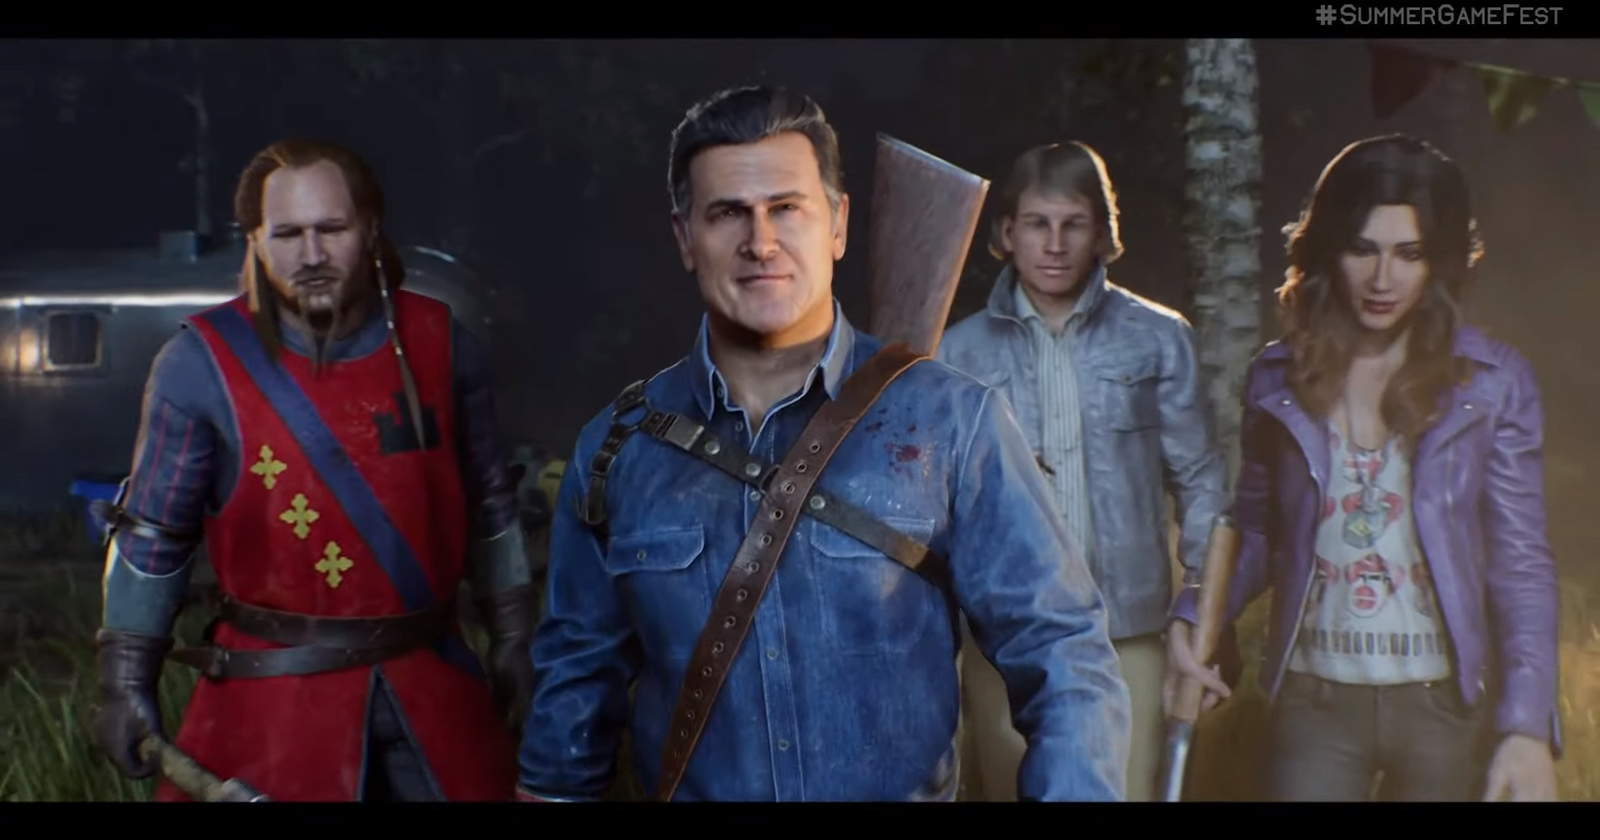 Evil Dead: The Game - Is There a Story Mode?